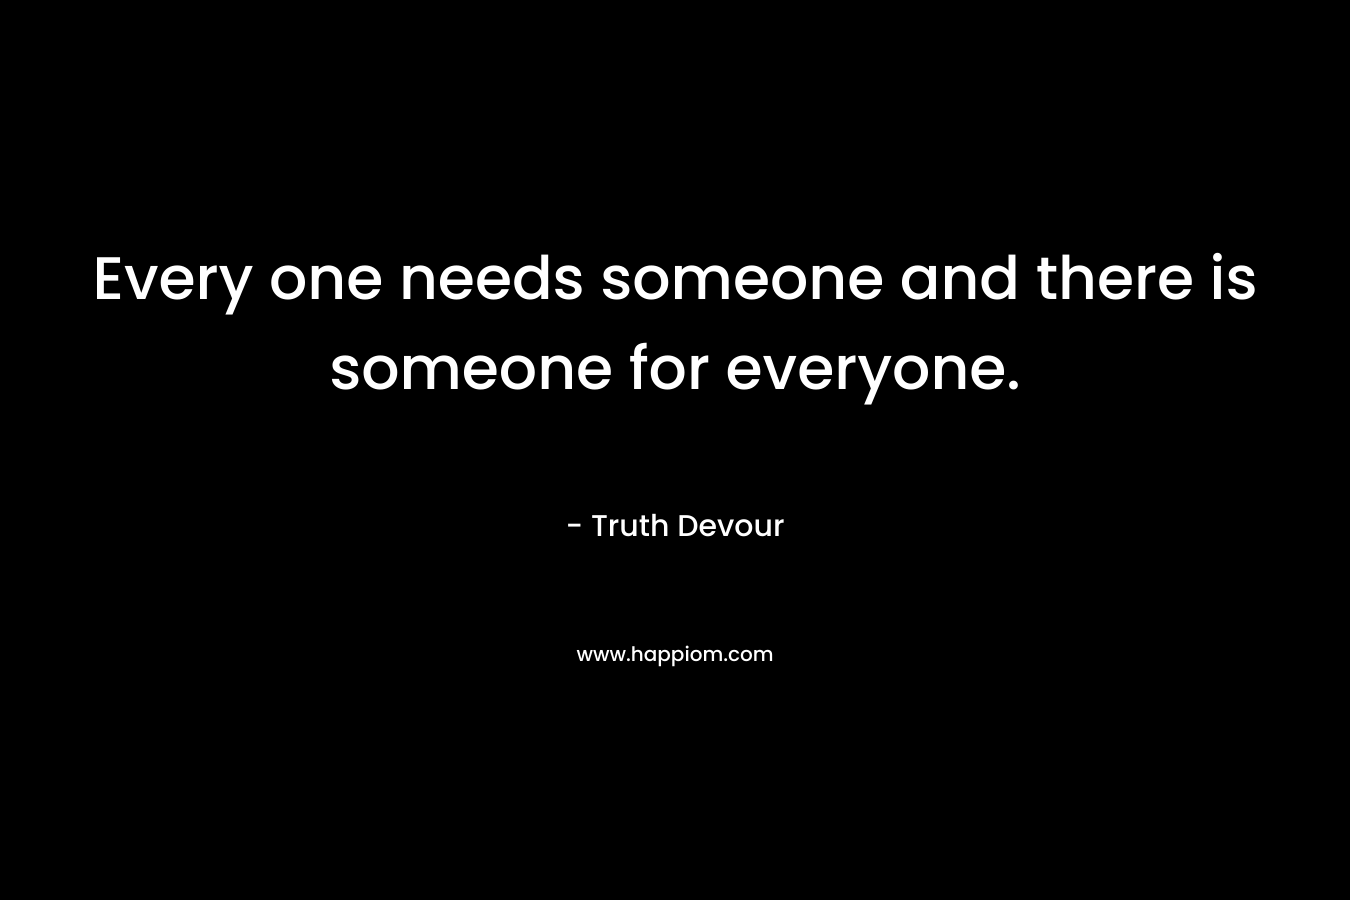 Every one needs someone and there is someone for everyone.